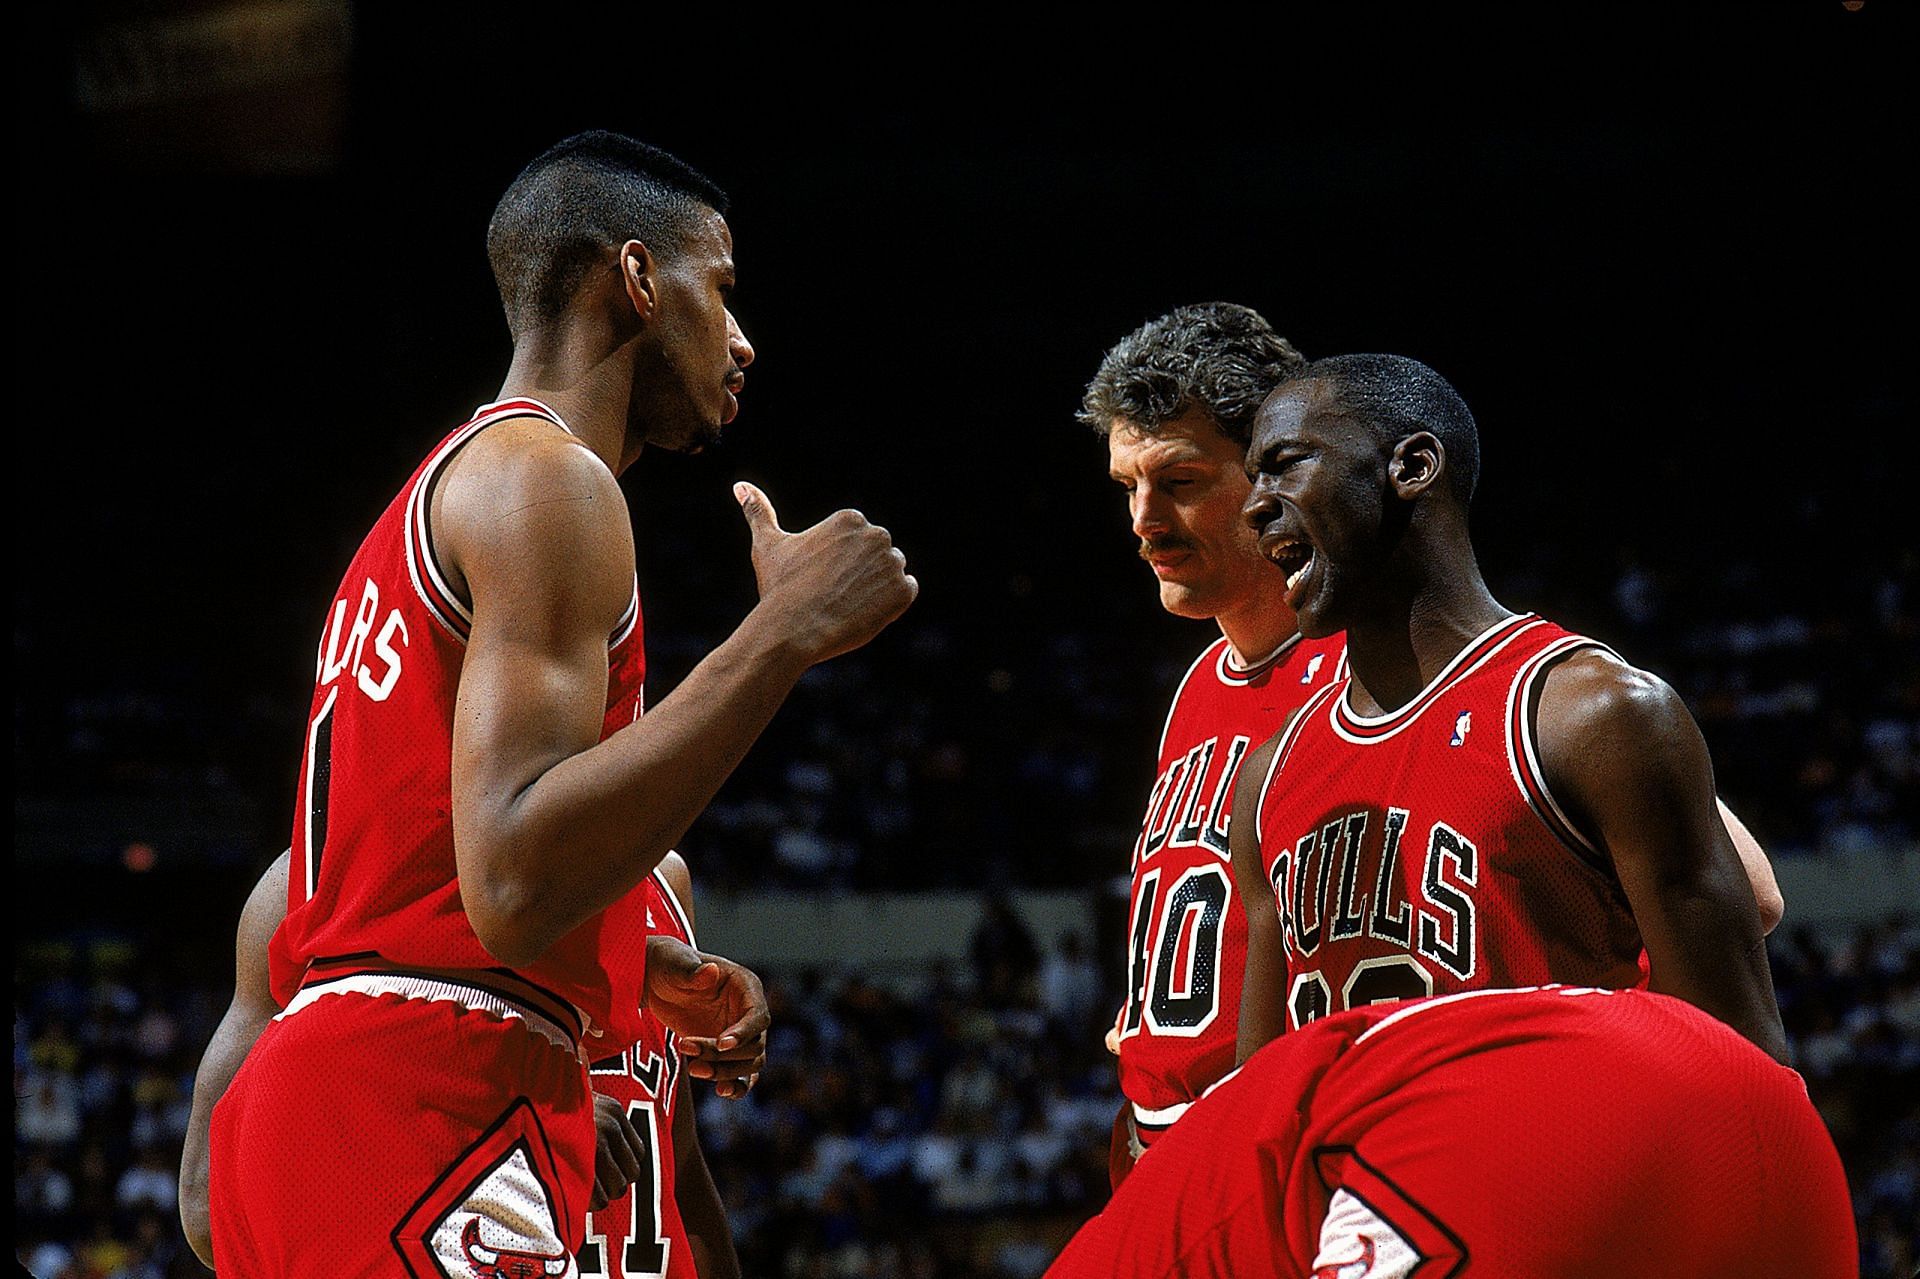 Jordan with his teammates during the 1987-88 season for the Bulls